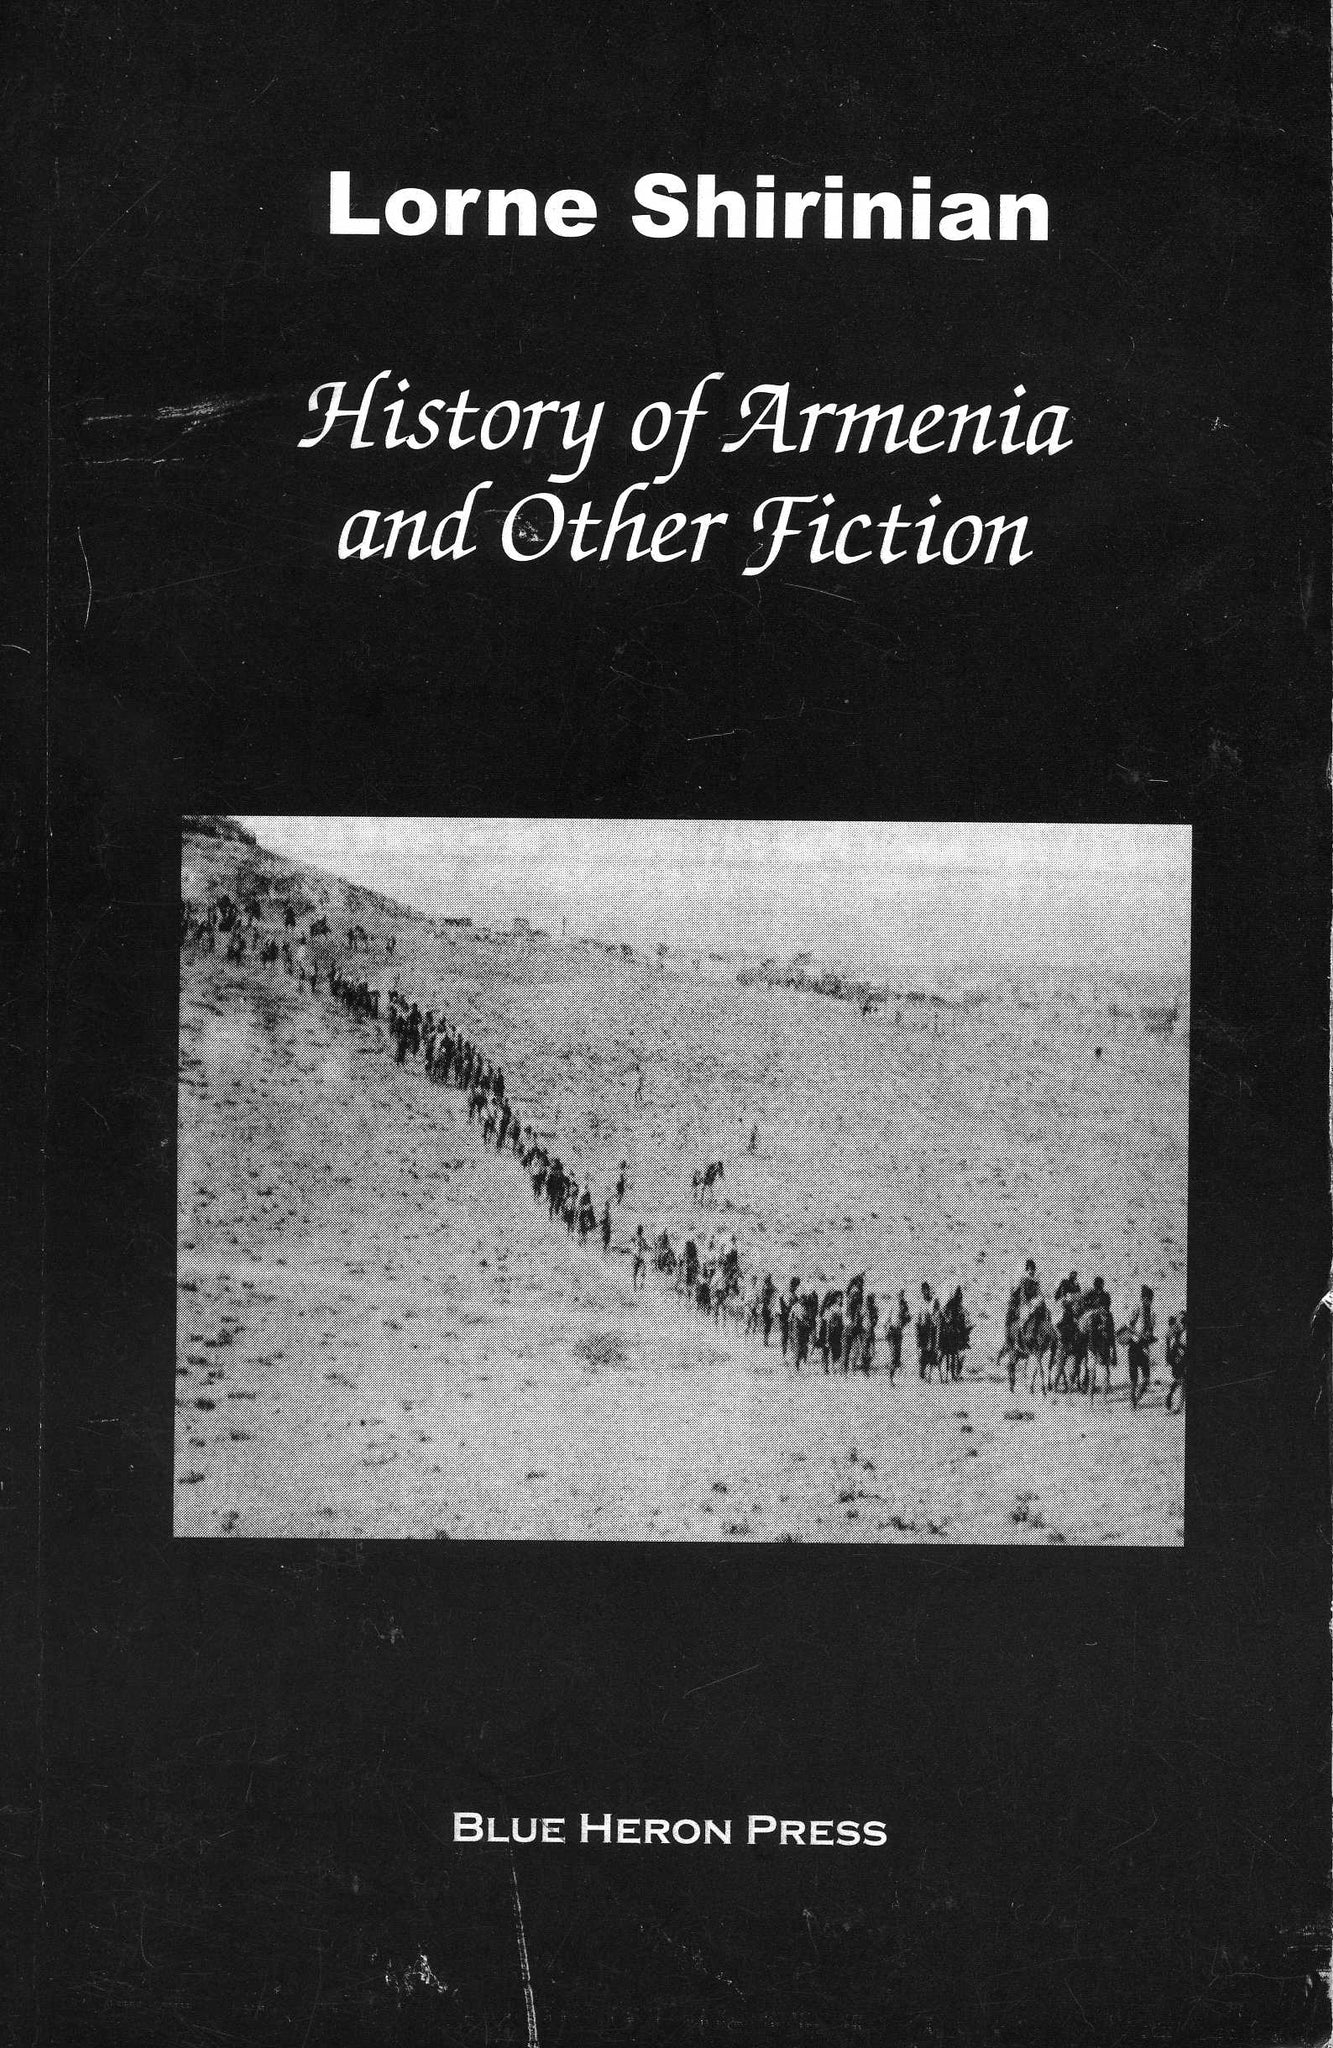 HISTORY OF ARMENIA AND OTHER FICTION